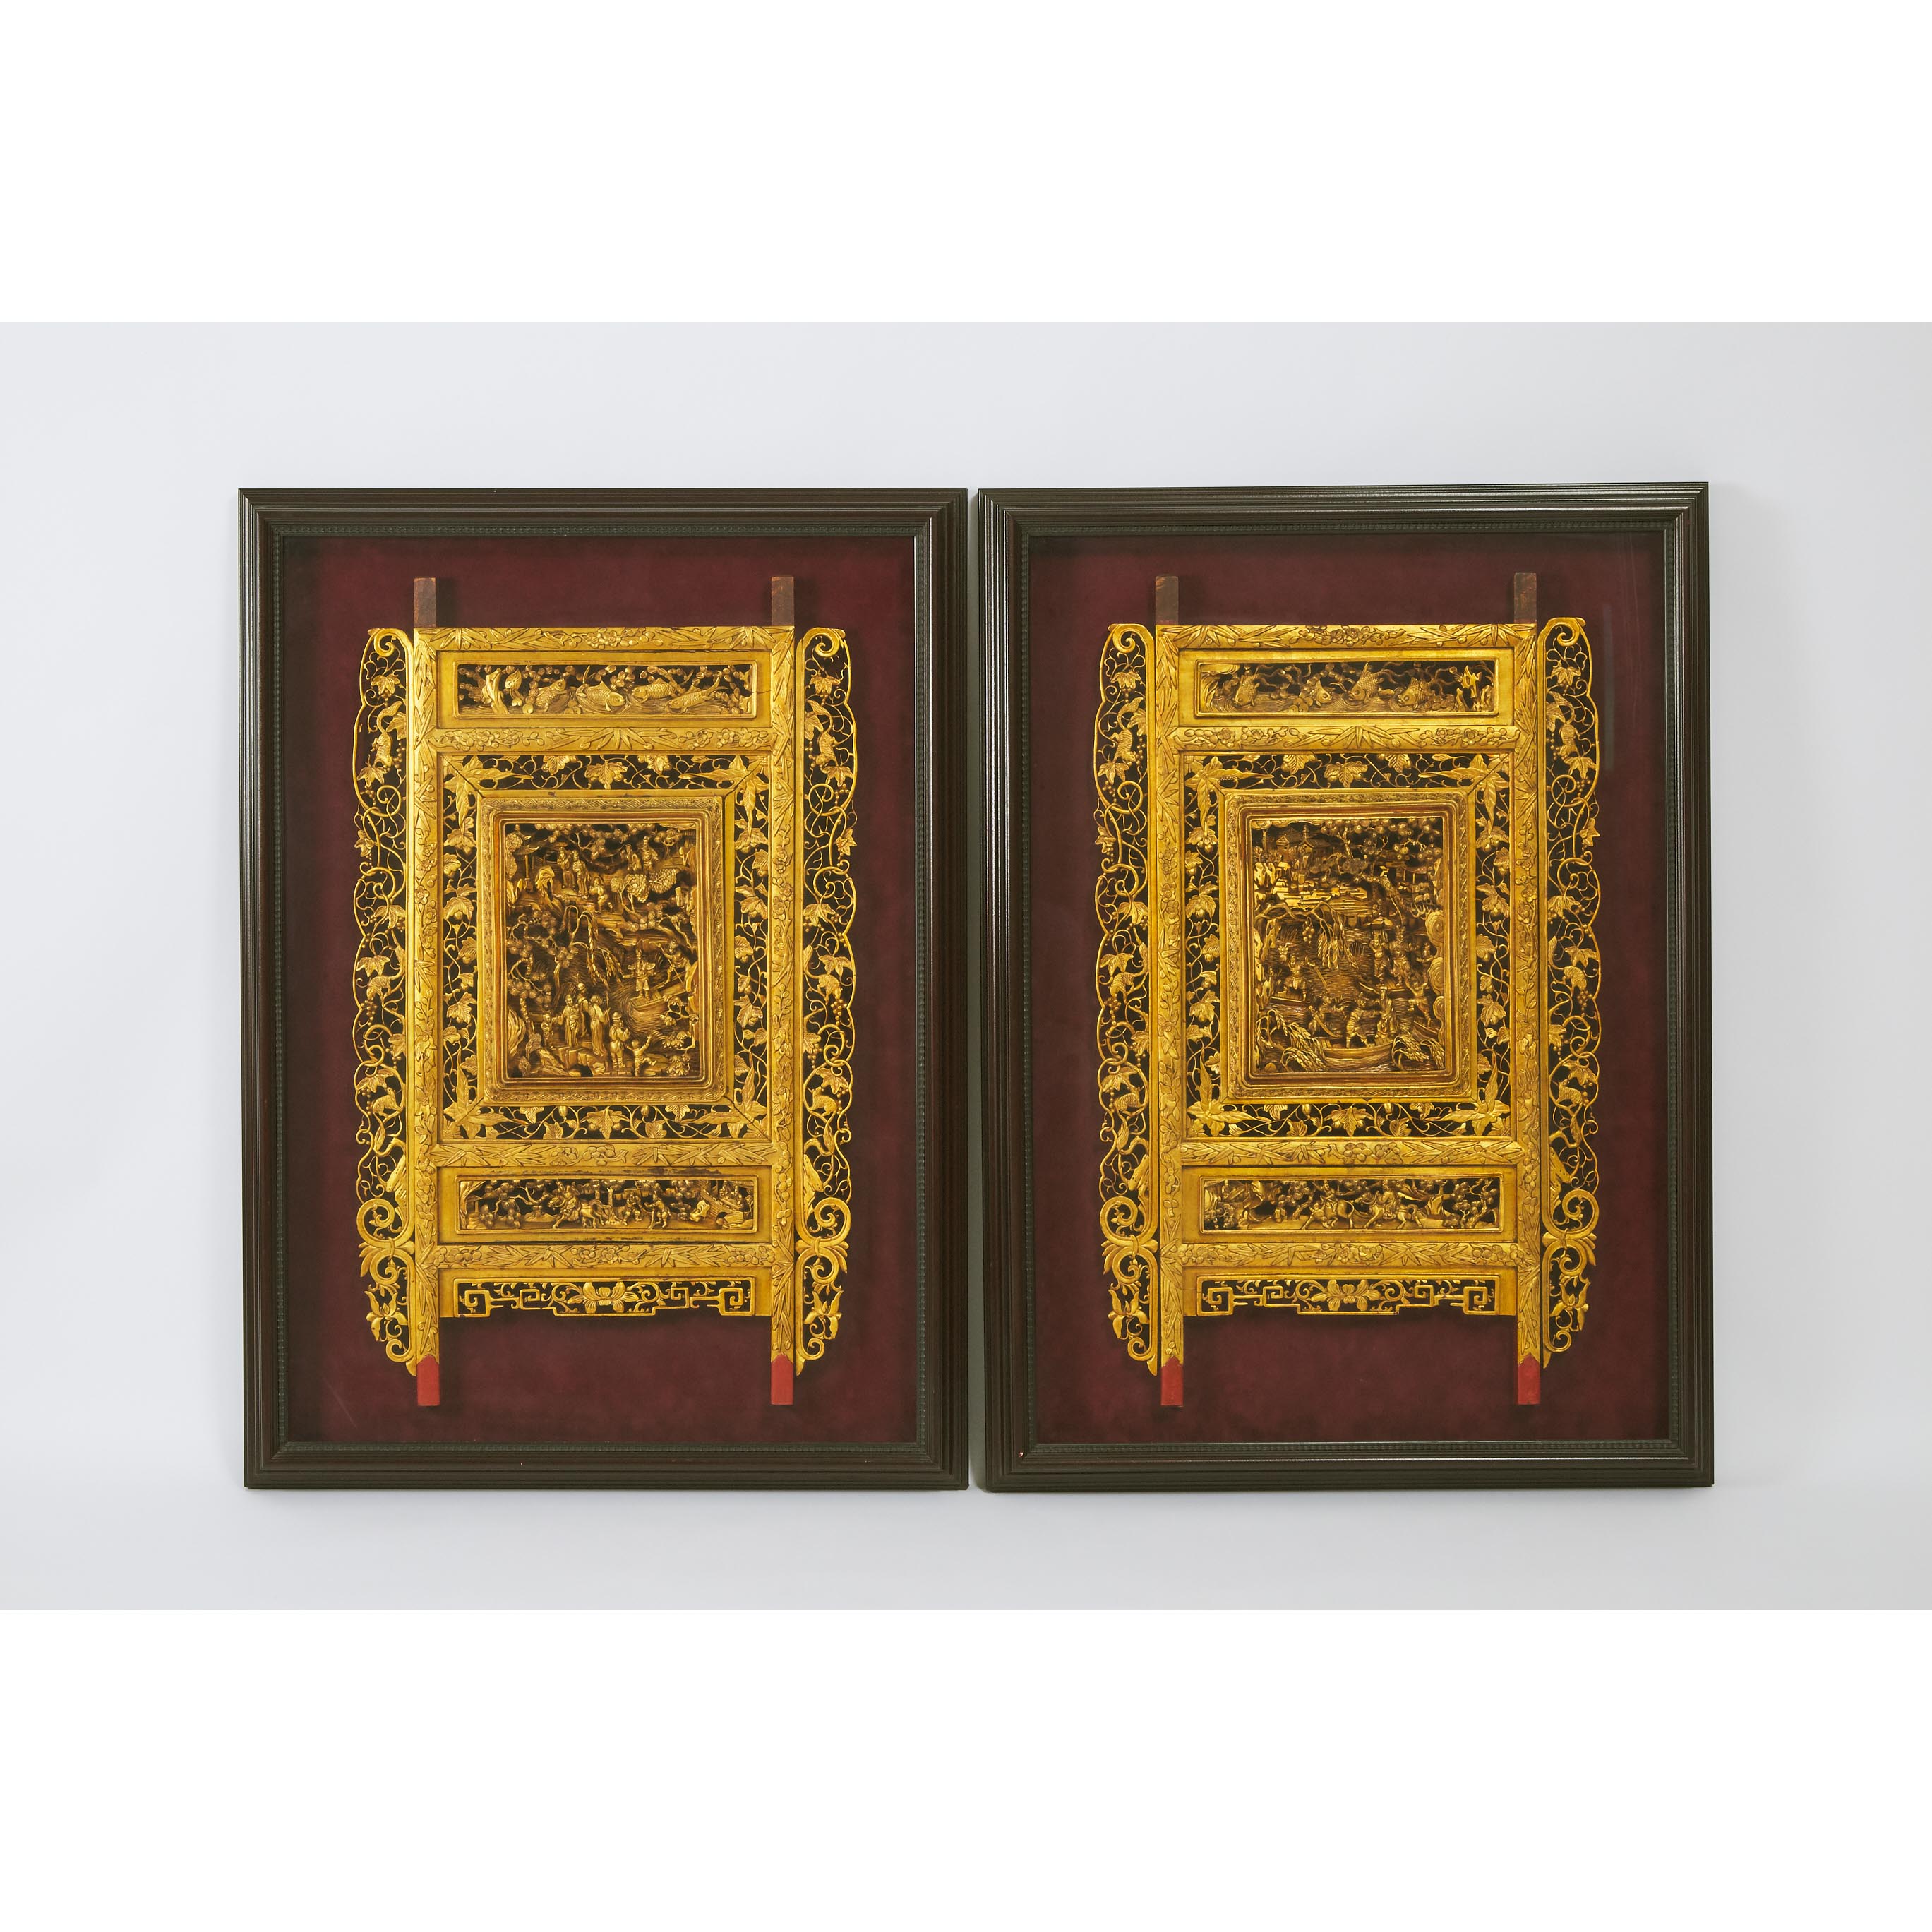 A Pair of Large Framed Chinese Gilt Wood Temple Carvings, 19th Century